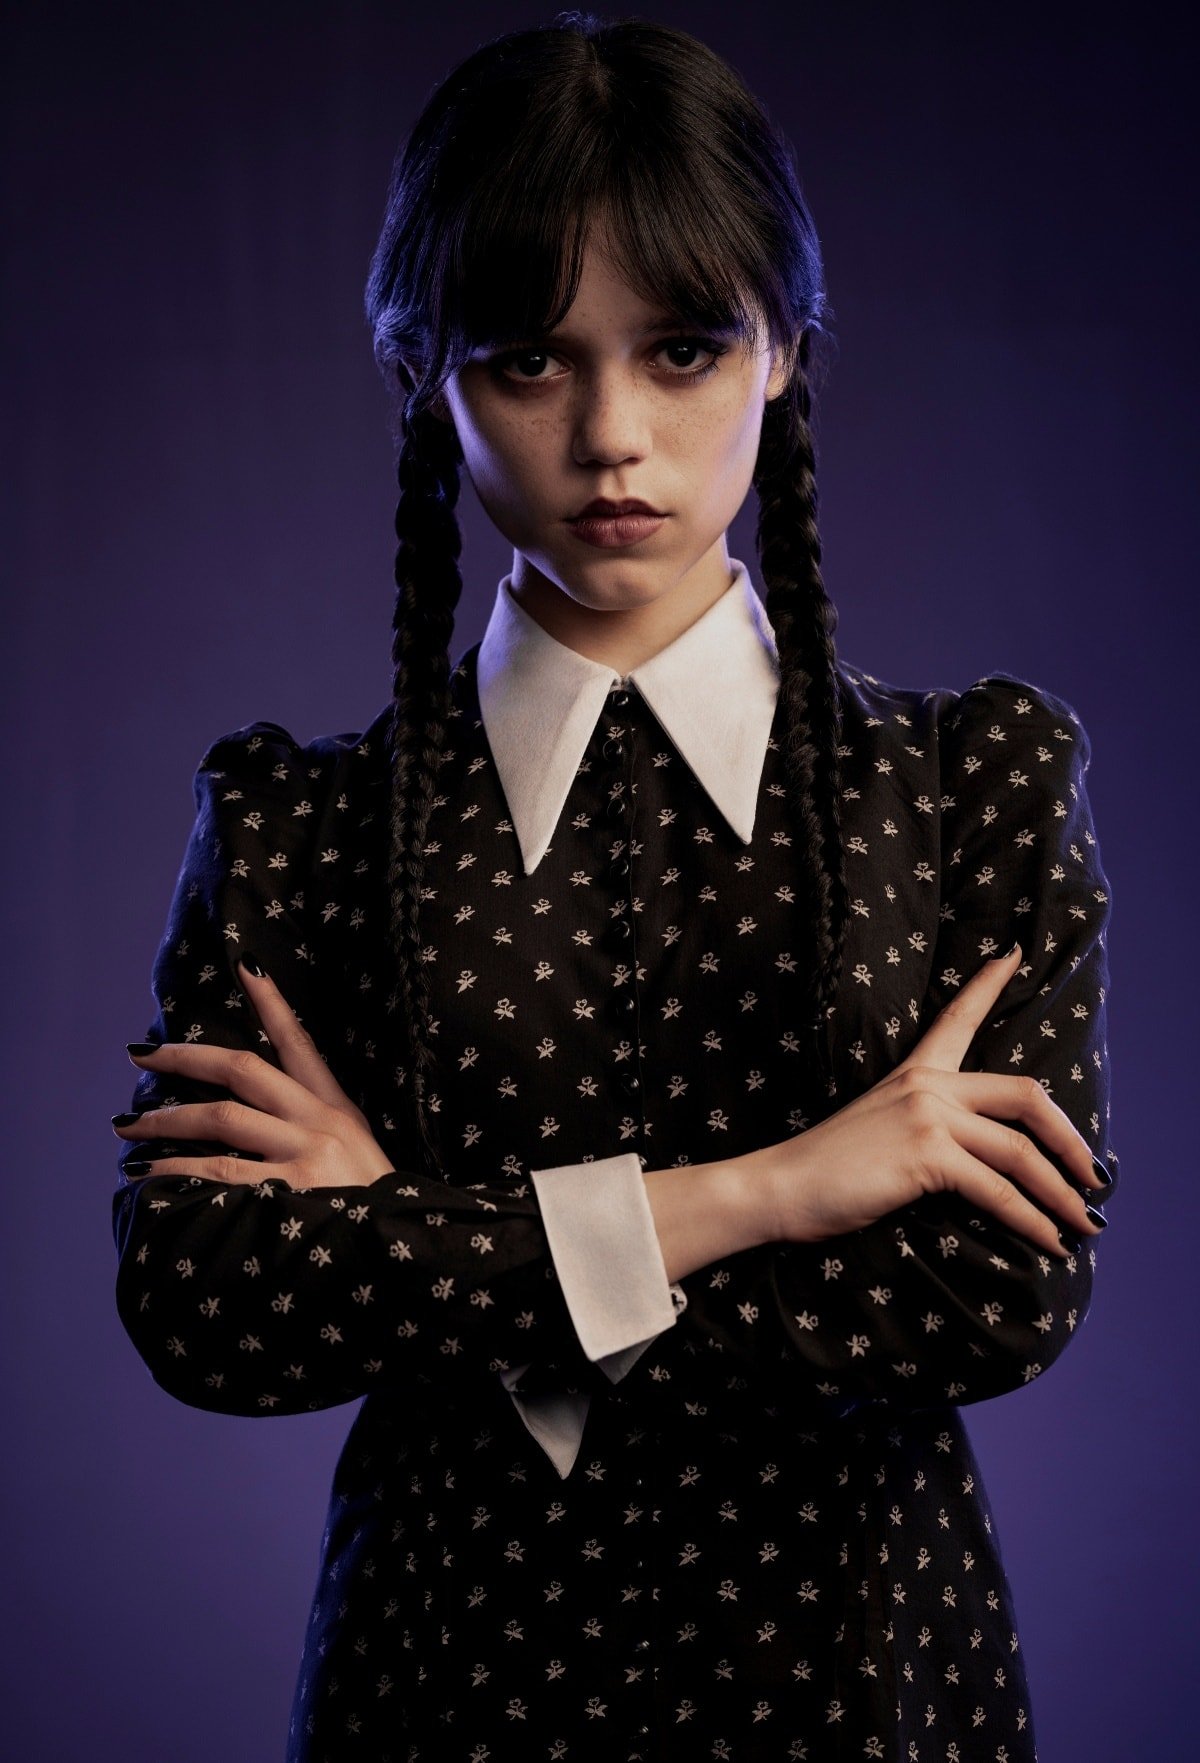 Jenna Ortega as Wednesday Addams in the 2022 coming-of-age supernatural horror comedy television series Wednesday